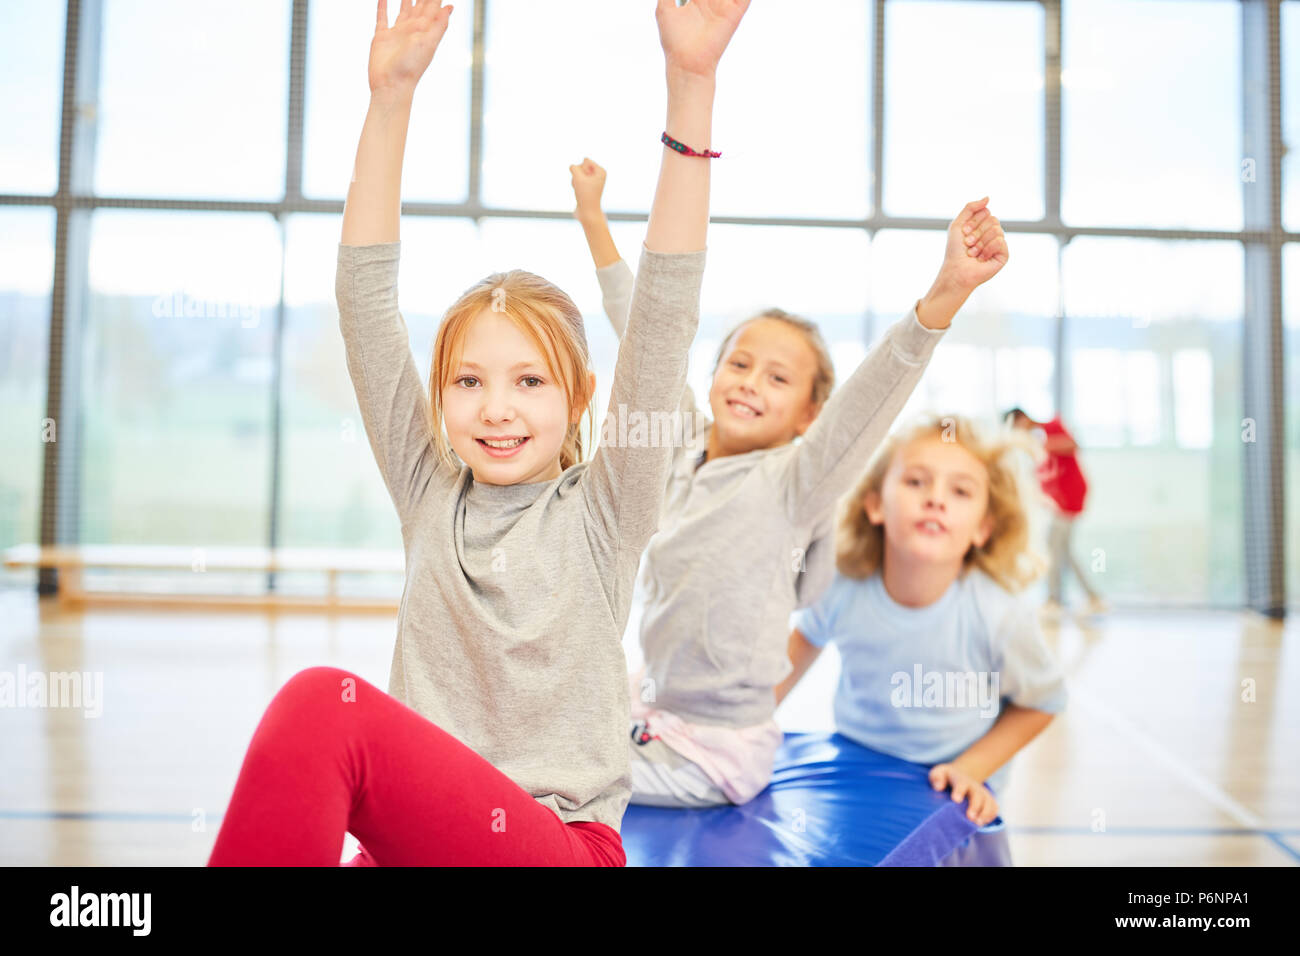 Group of kids of elementary school in the gym during a gym exercise Stock Photo